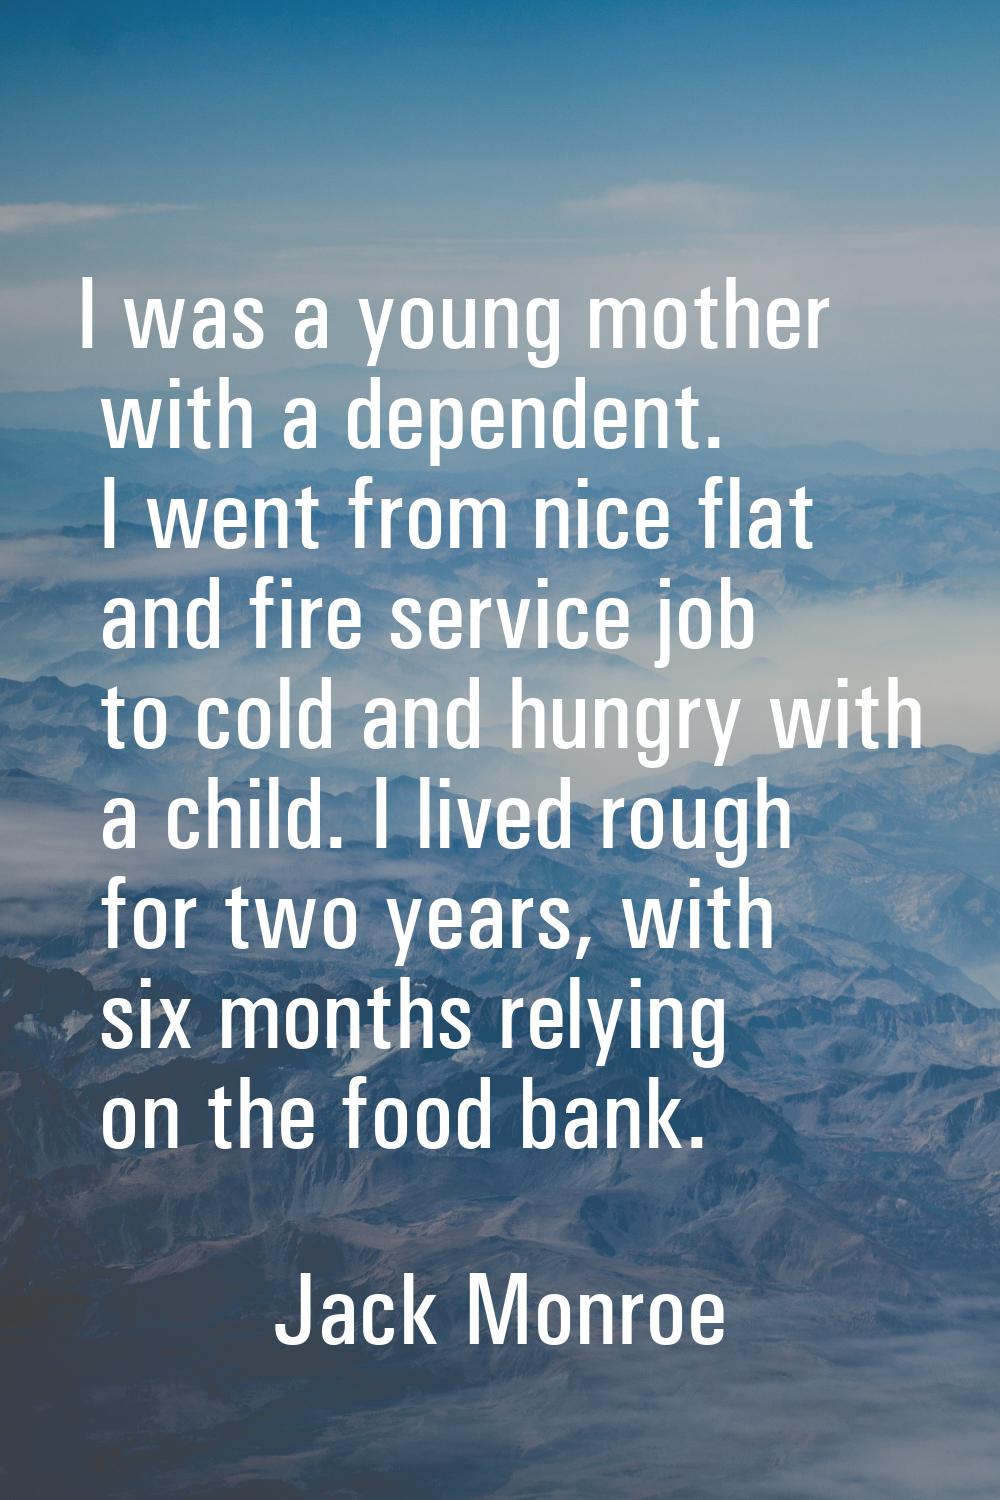 I was a young mother with a dependent. I went from nice flat and fire service job to cold and hungr